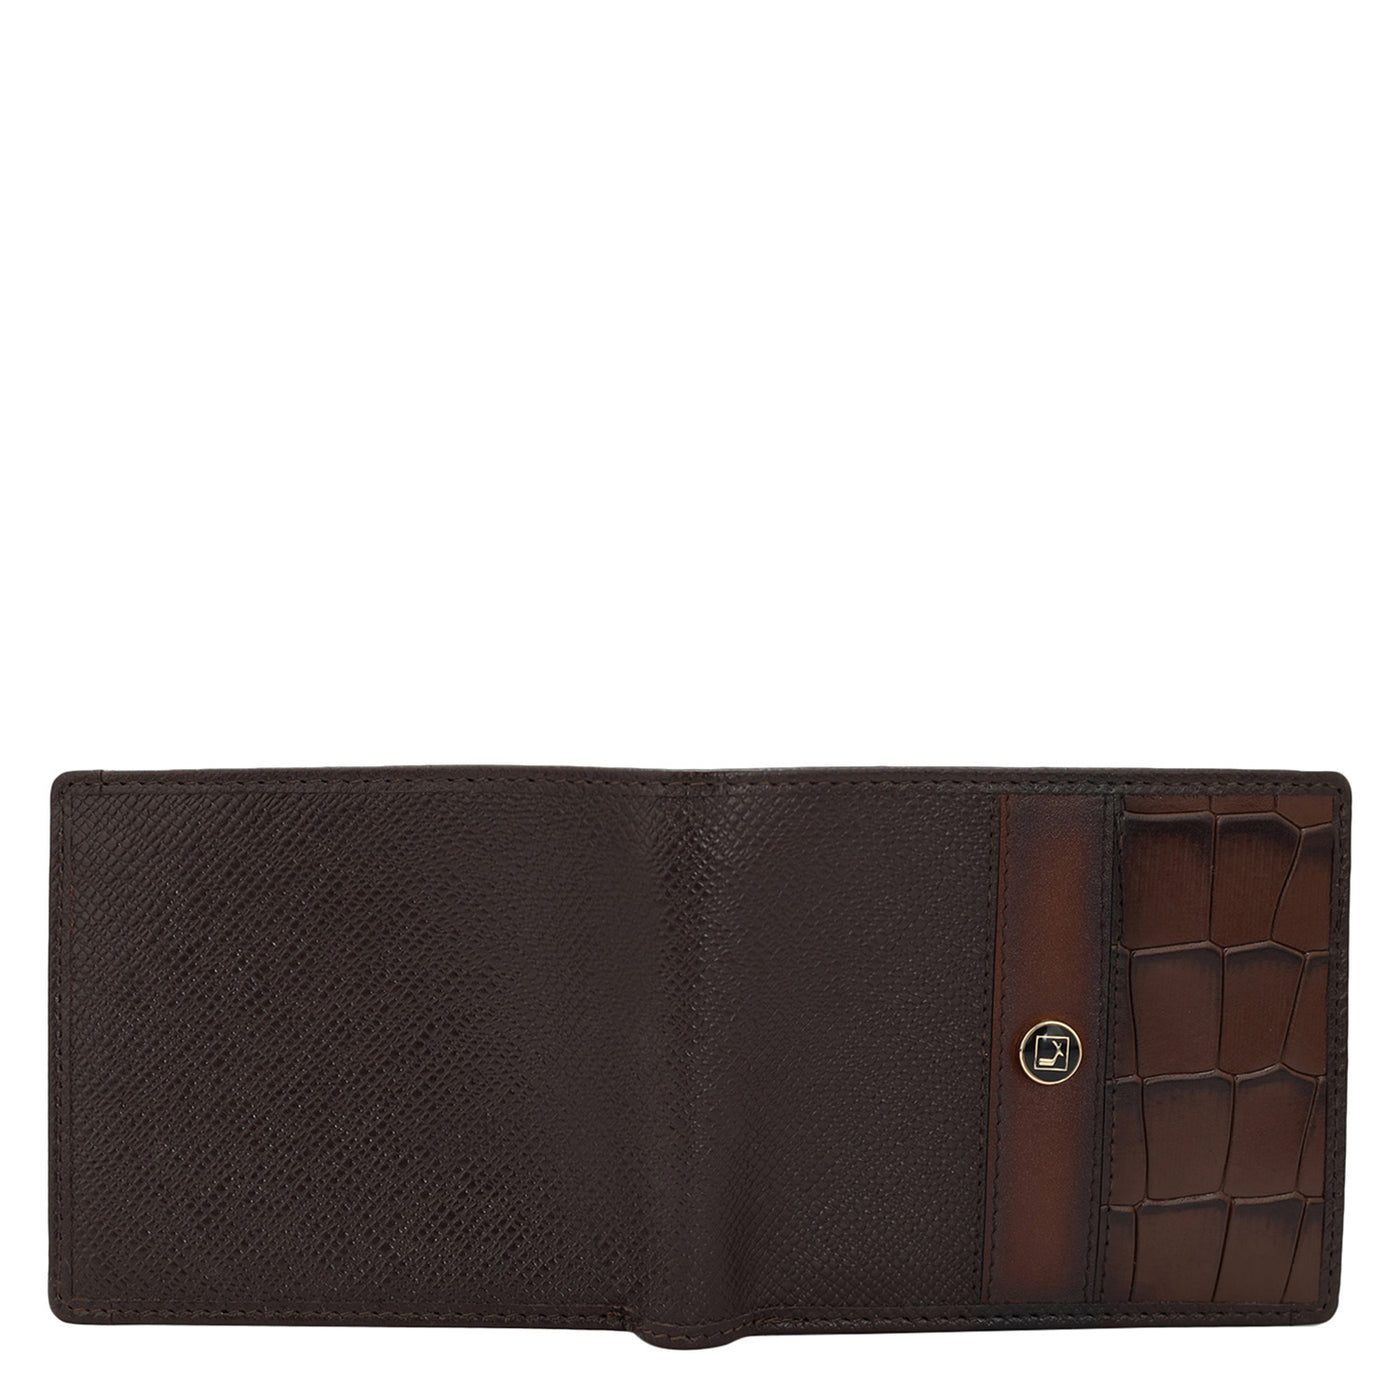 Franzy Croco Leather Mens Wallet - Chocolate